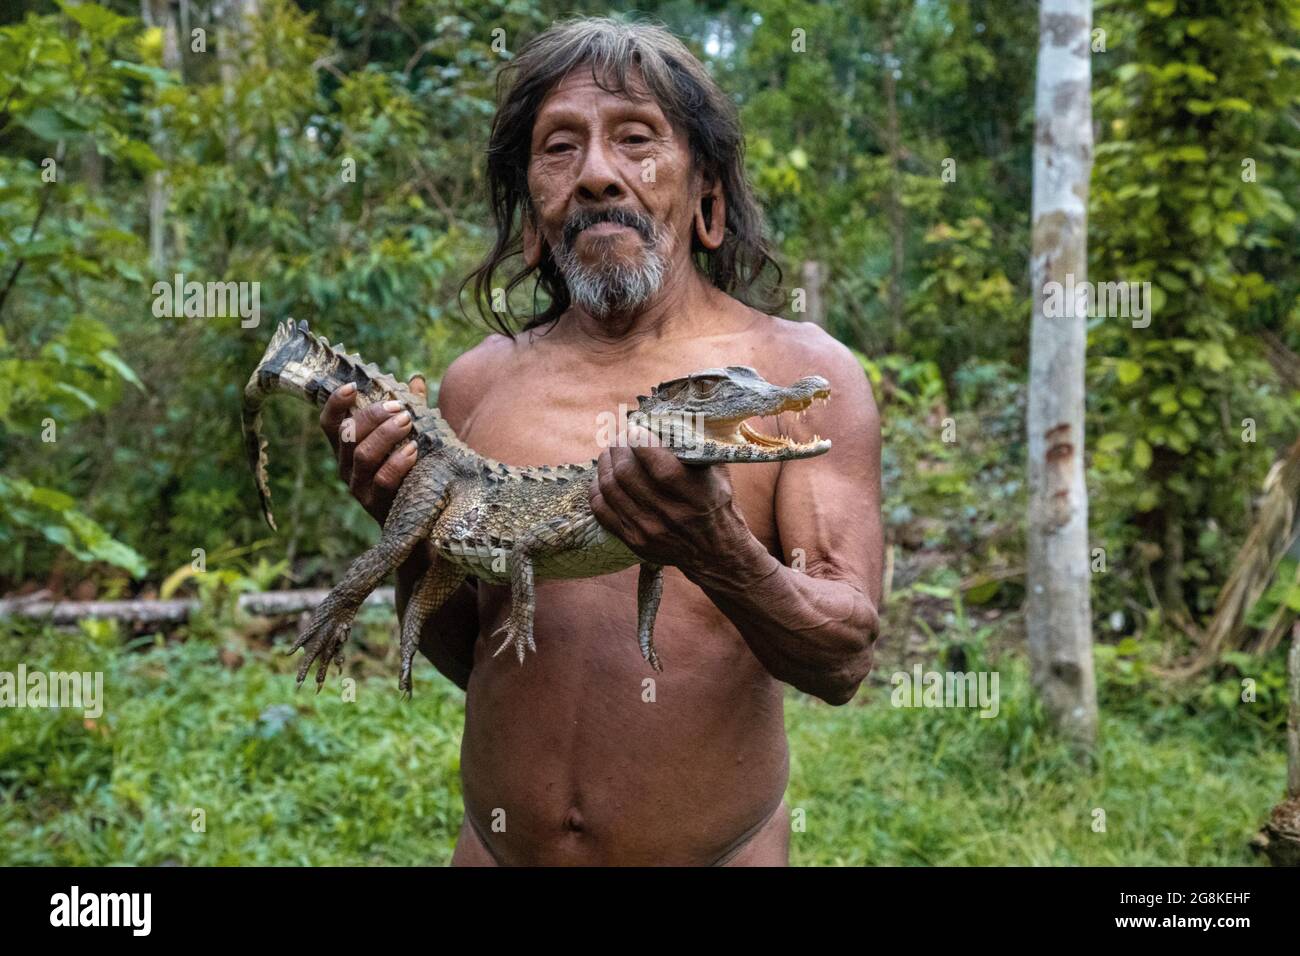 A senior male member of the tribe displayed a crocodile he had caught. AMAZONIAN ECUADOR: In one image, a woman wore red makeup across her eyes and a Stock Photo